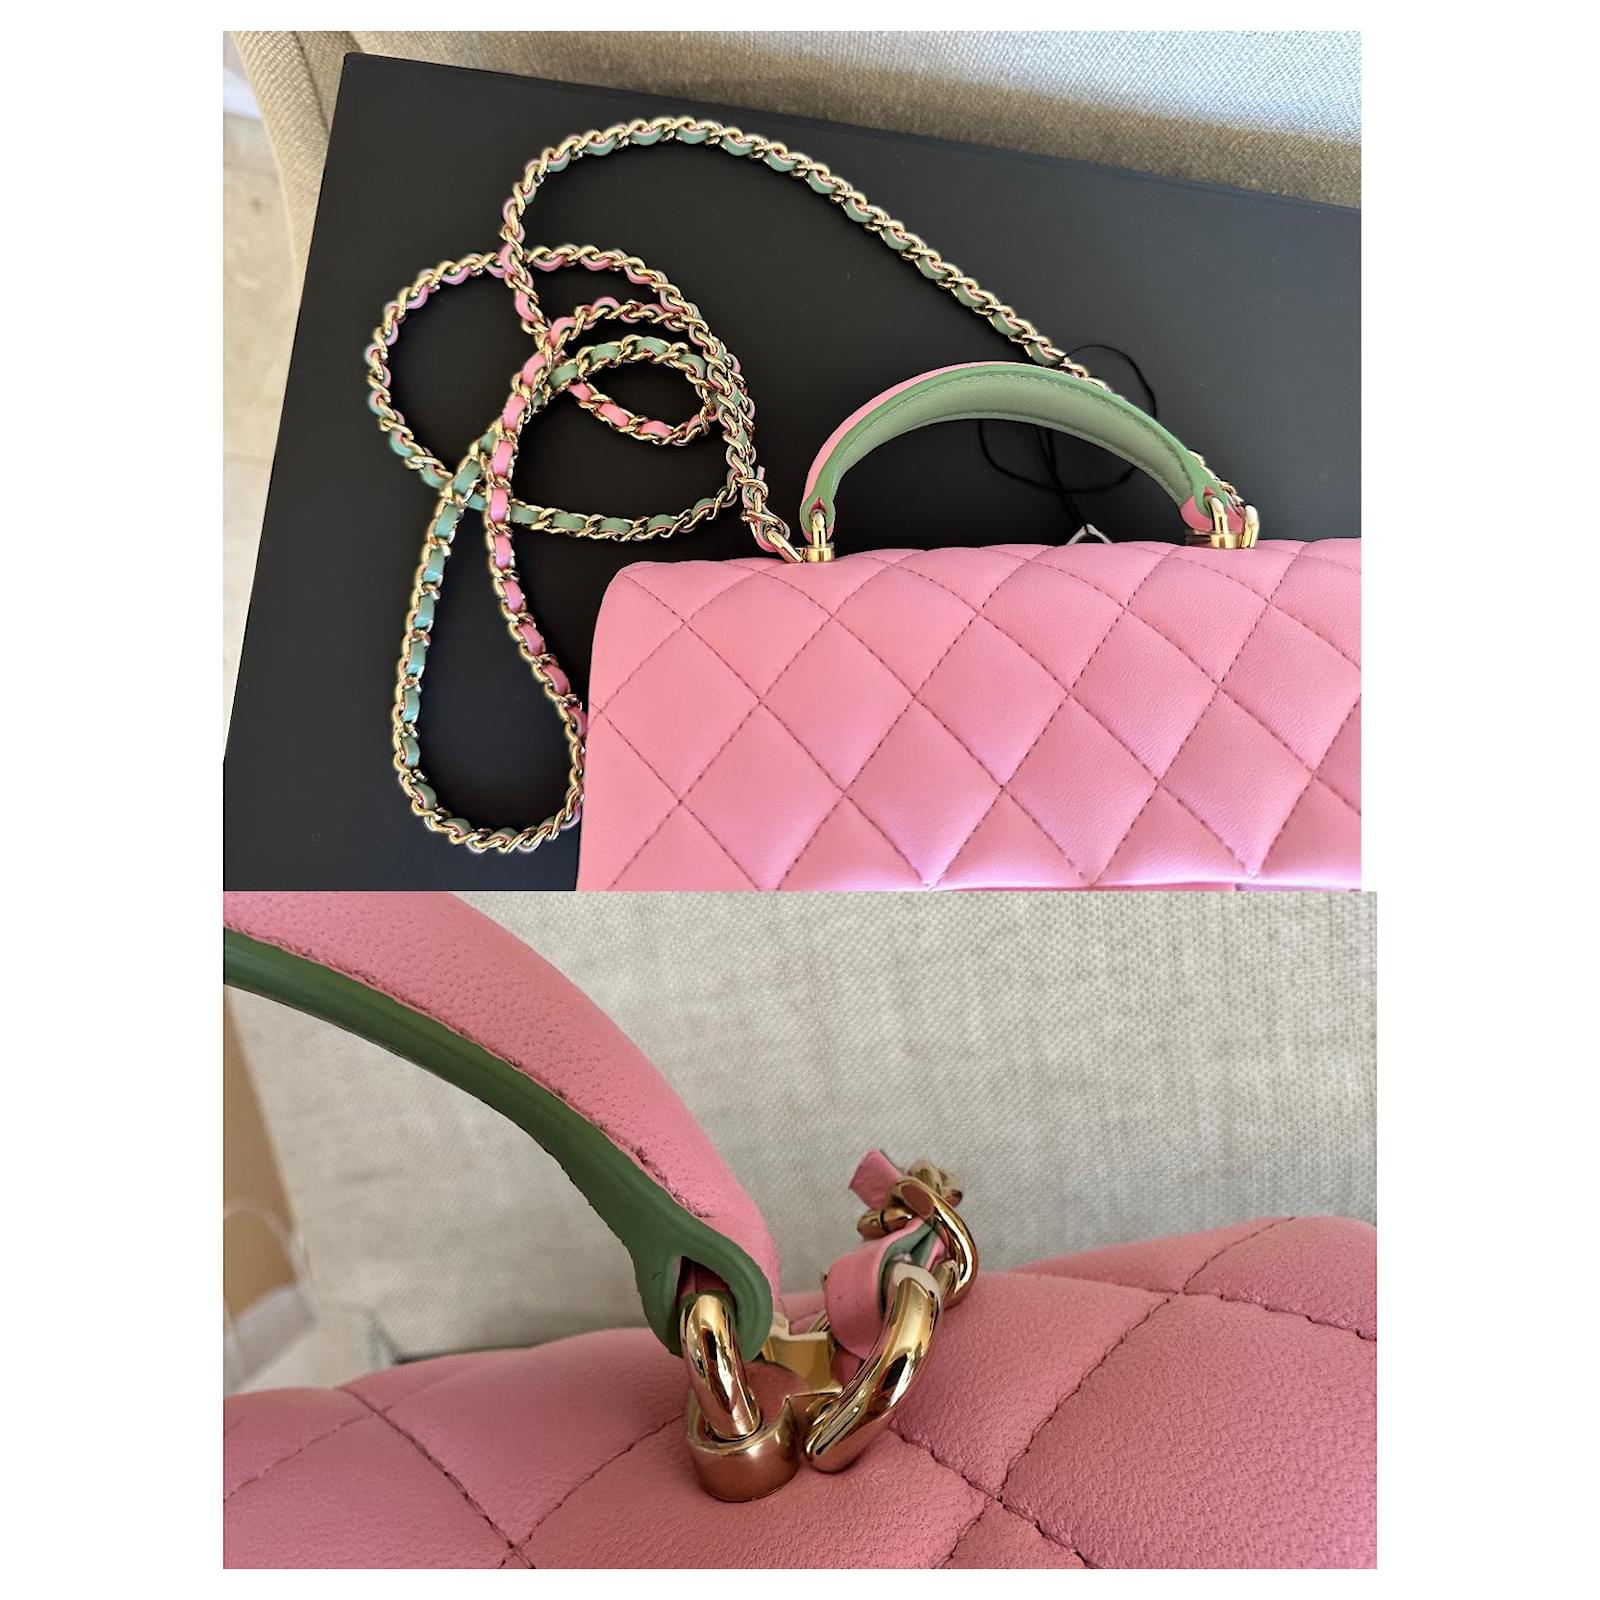 Classic Mini Flap Bag with Top Handle Pink/green